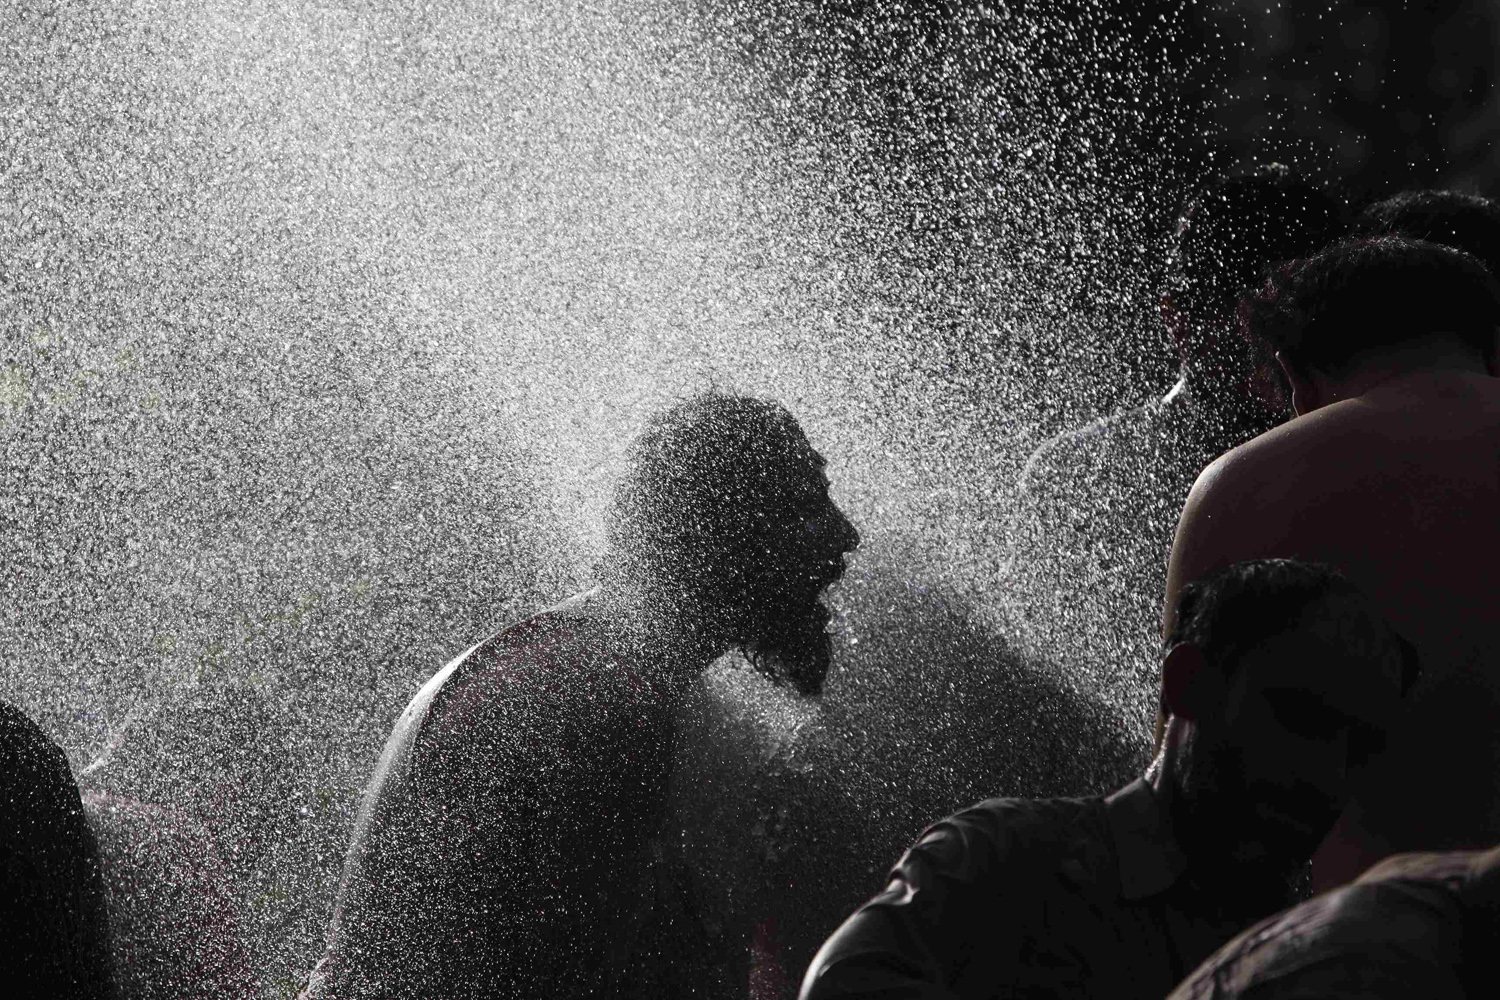 An anti-government protester takes a morning bath with others at public pump during the Revolution March in Islamabad